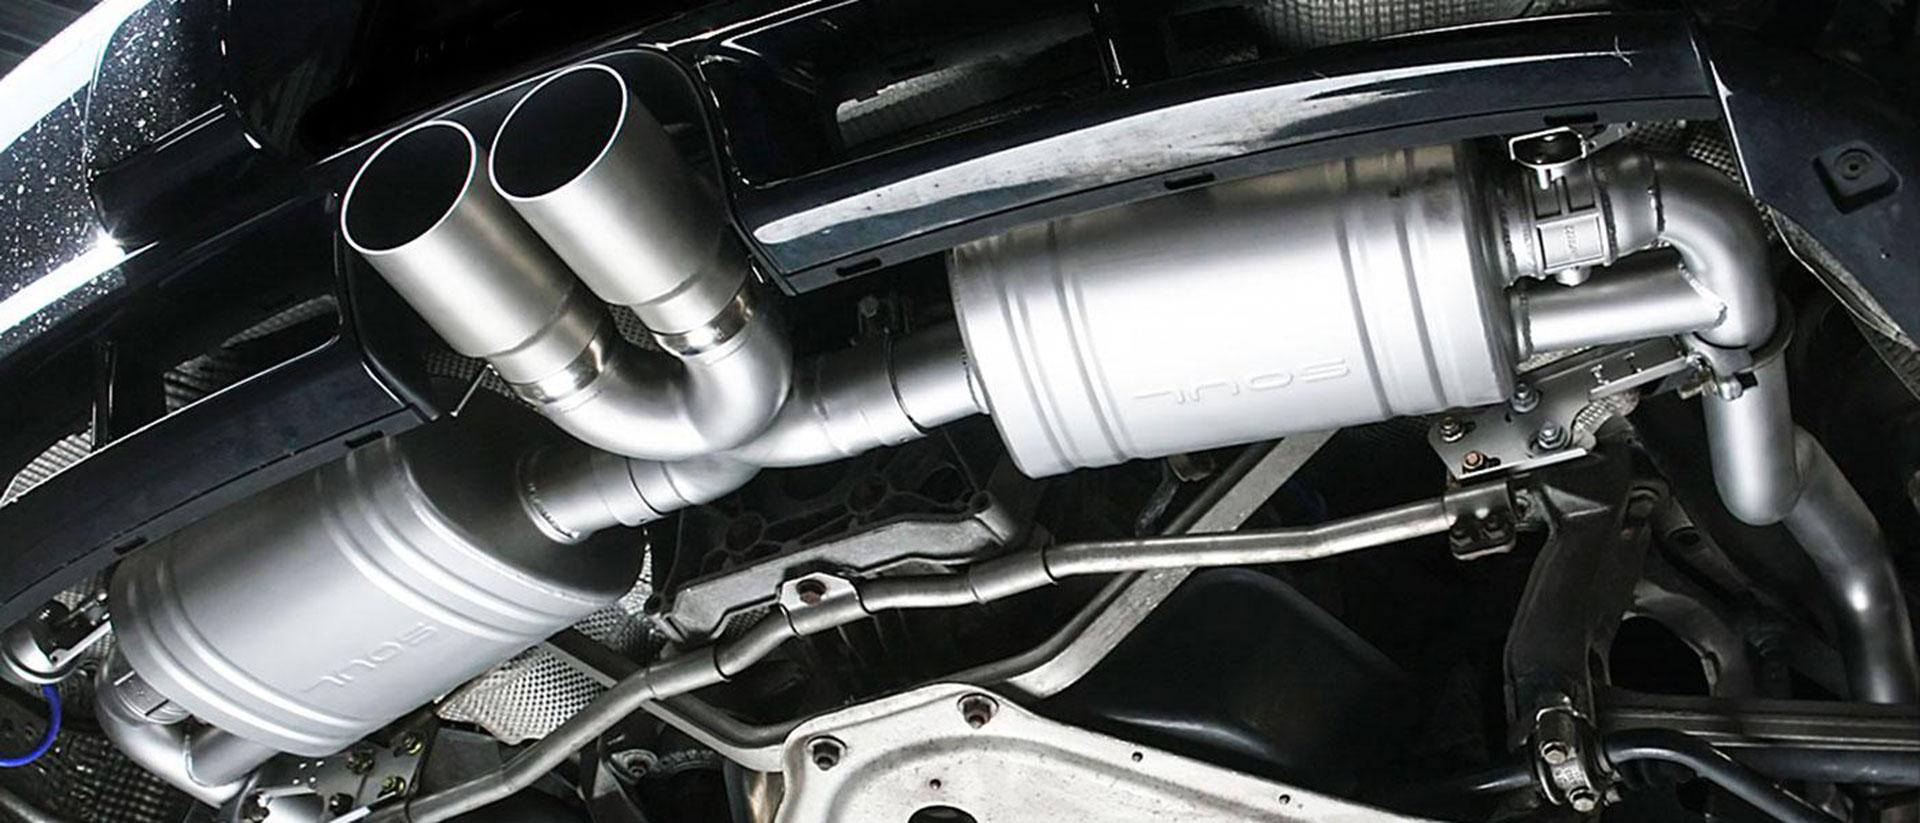 MUFFLER & EXHAUST SERVICE - BY PROFESSIONAL AUTO TECHS